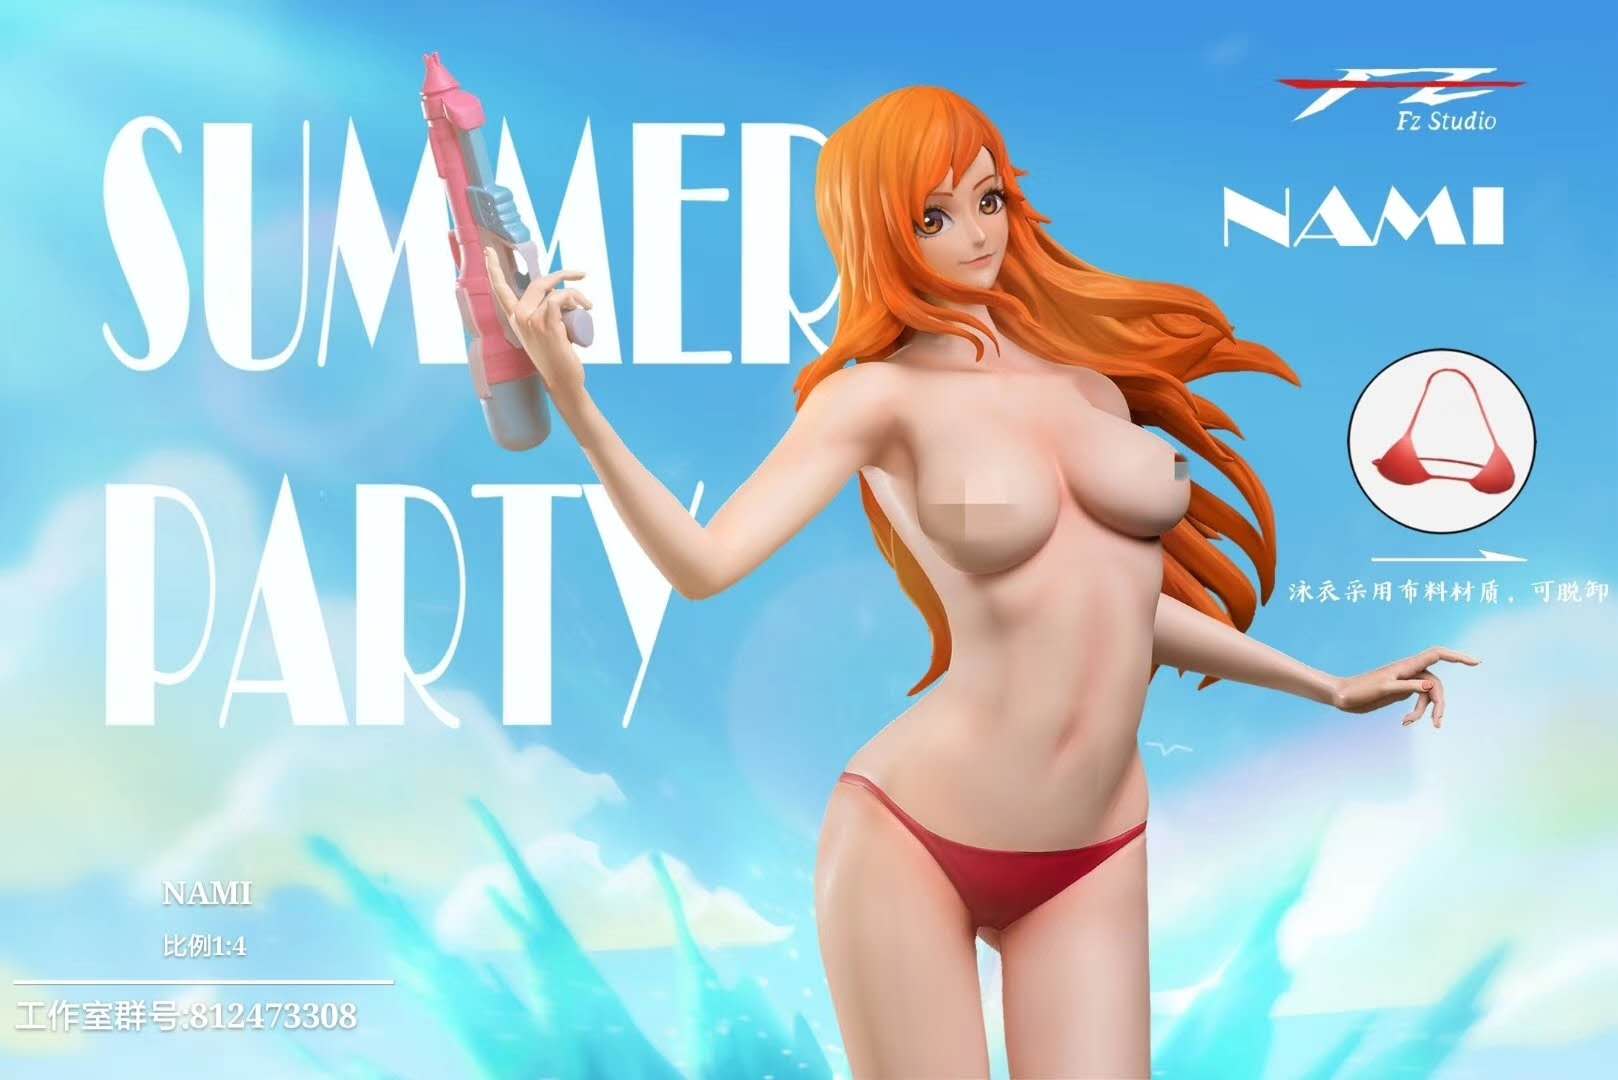 In Stock】Fz Studio One-Piece Nami Summer Party Resin Statue